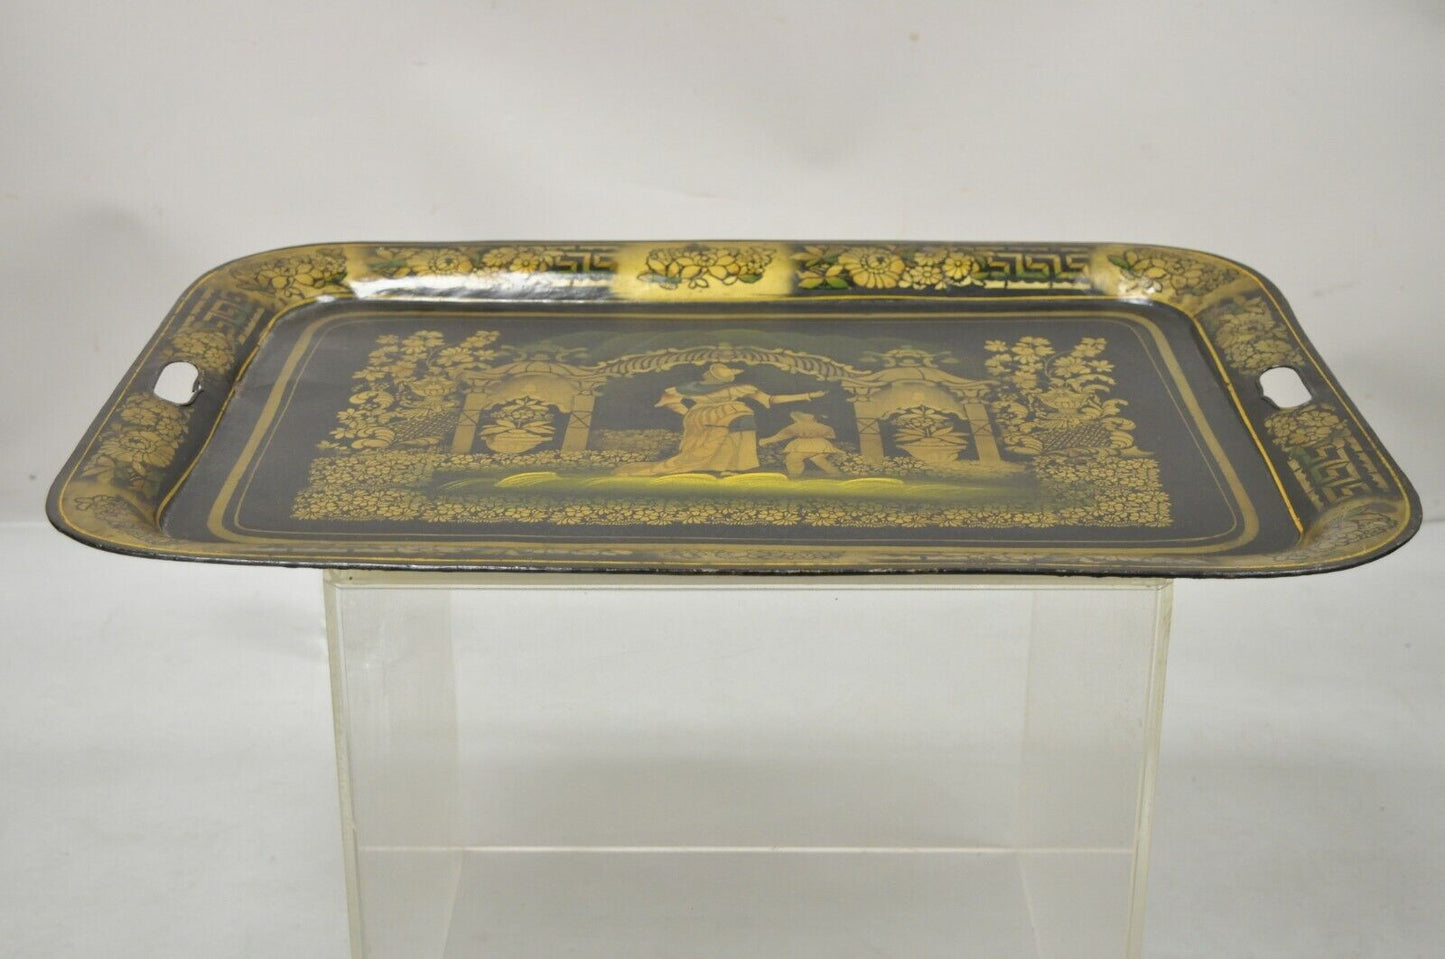 Antique French Country Tole Metal Black Gold 26" Garden Scene Platter Tray